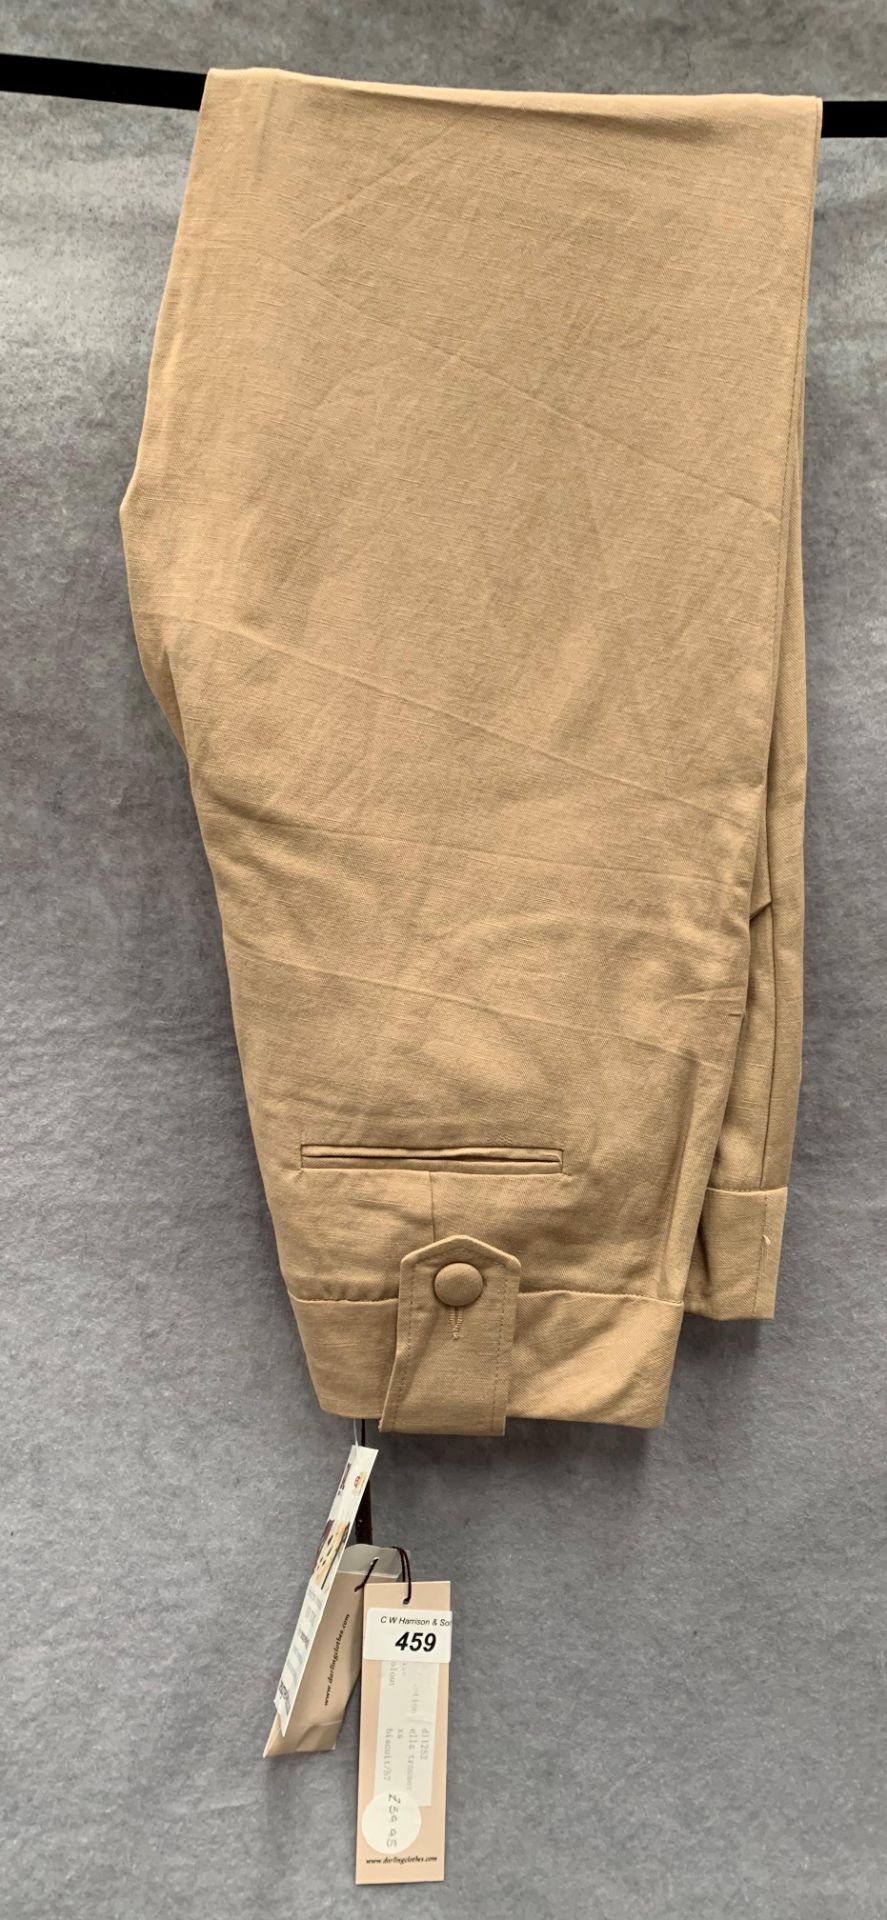 A pair of Darling ladies trousers, light brown, size XS,